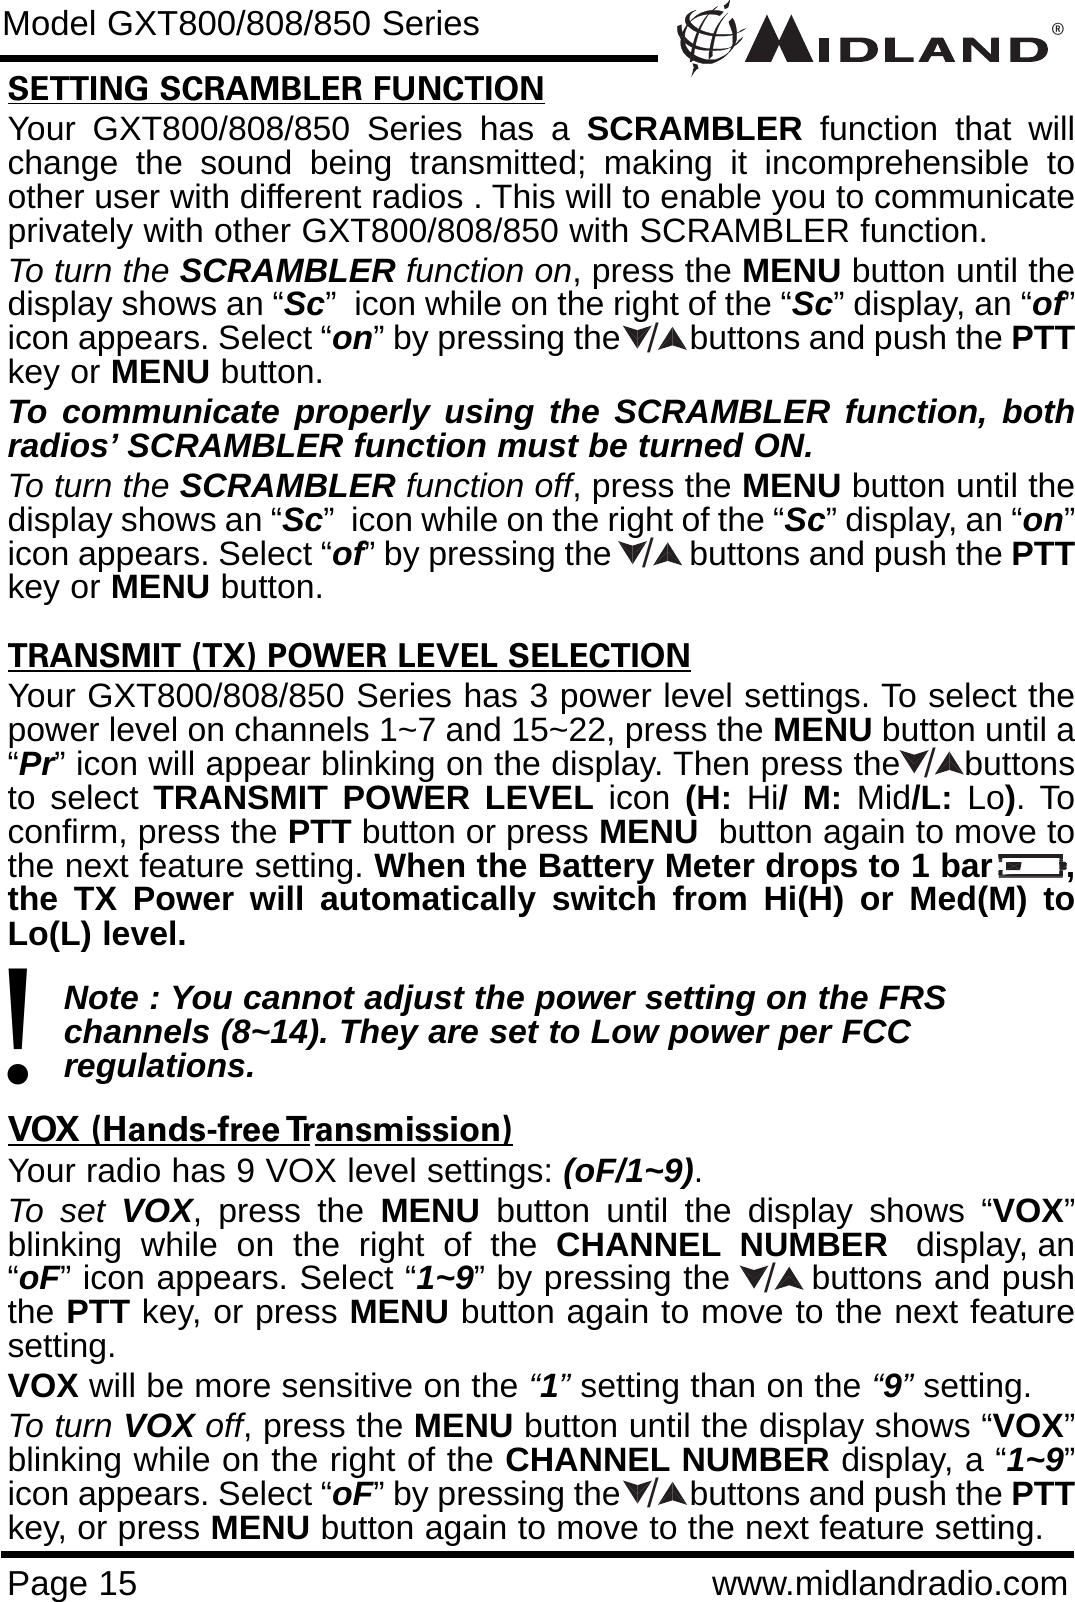 ®Page 15 www.midlandradio.comSETTING SCRAMBLER FUNCTIONYour GXT800/808/850 Series has a SCRAMBLER function that willchange the sound being transmitted; making it incomprehensible toother user with different radios . This will to enable you to communicateprivately with other GXT800/808/850 with SCRAMBLER function. To turn the SCRAMBLER function on, press the MENU button until thedisplay shows an “Sc”  icon while on the right of the “Sc” display, an “of”icon appears. Select “on” by pressing the        buttons and push the PTTkey or MENU button. To communicate properly using the SCRAMBLER function, bothradios’ SCRAMBLER function must be turned ON.To turn the SCRAMBLER function off, press the MENU button until thedisplay shows an “Sc”  icon while on the right of the “Sc” display, an “on”icon appears. Select “of” by pressing the         buttons and push the PTTkey or MENU button.TRANSMIT (TX) POWER LEVEL SELECTIONYour GXT800/808/850 Series has 3 power level settings. To select thepower level on channels 1~7 and 15~22, press the MENU button until a“Pr” icon will appear blinking on the display. Then press the     buttonsto select TRANSMIT POWER LEVEL icon  (H: Hi/ M: Mid/L:  Lo). Toconfirm, press the PTT button or press MENU button again to move tothe next feature setting. When the Battery Meter drops to 1 bar       ,the TX Power will automatically switch from Hi(H) or Med(M) toLo(L) level.Note : You cannot adjust the power setting on the FRS   channels (8~14). They are set to Low power per FCC          regulations.VOX (Hands-free Transmission)Your radio has 9 VOX level settings: (oF/1~9).To set VOX, press the MENU button until the display shows “VOX”blinking  while  on  the  right  of  the  CHANNEL NUMBER display, an“oF” icon appears. Select “1~9” by pressing the       buttons and pushthe PTT key, or press MENU button again to move to the next featuresetting.  VOX will be more sensitive on the “1”setting than on the “9”setting.To turn VOX off, press the MENU button until the display shows “VOX”blinking while on the right of the CHANNEL NUMBER display, a “1~9”icon appears. Select “oF” by pressing the        buttons and push the PTTkey, or press MENU button again to move to the next feature setting.Model GXT800/808/850 Series!/////